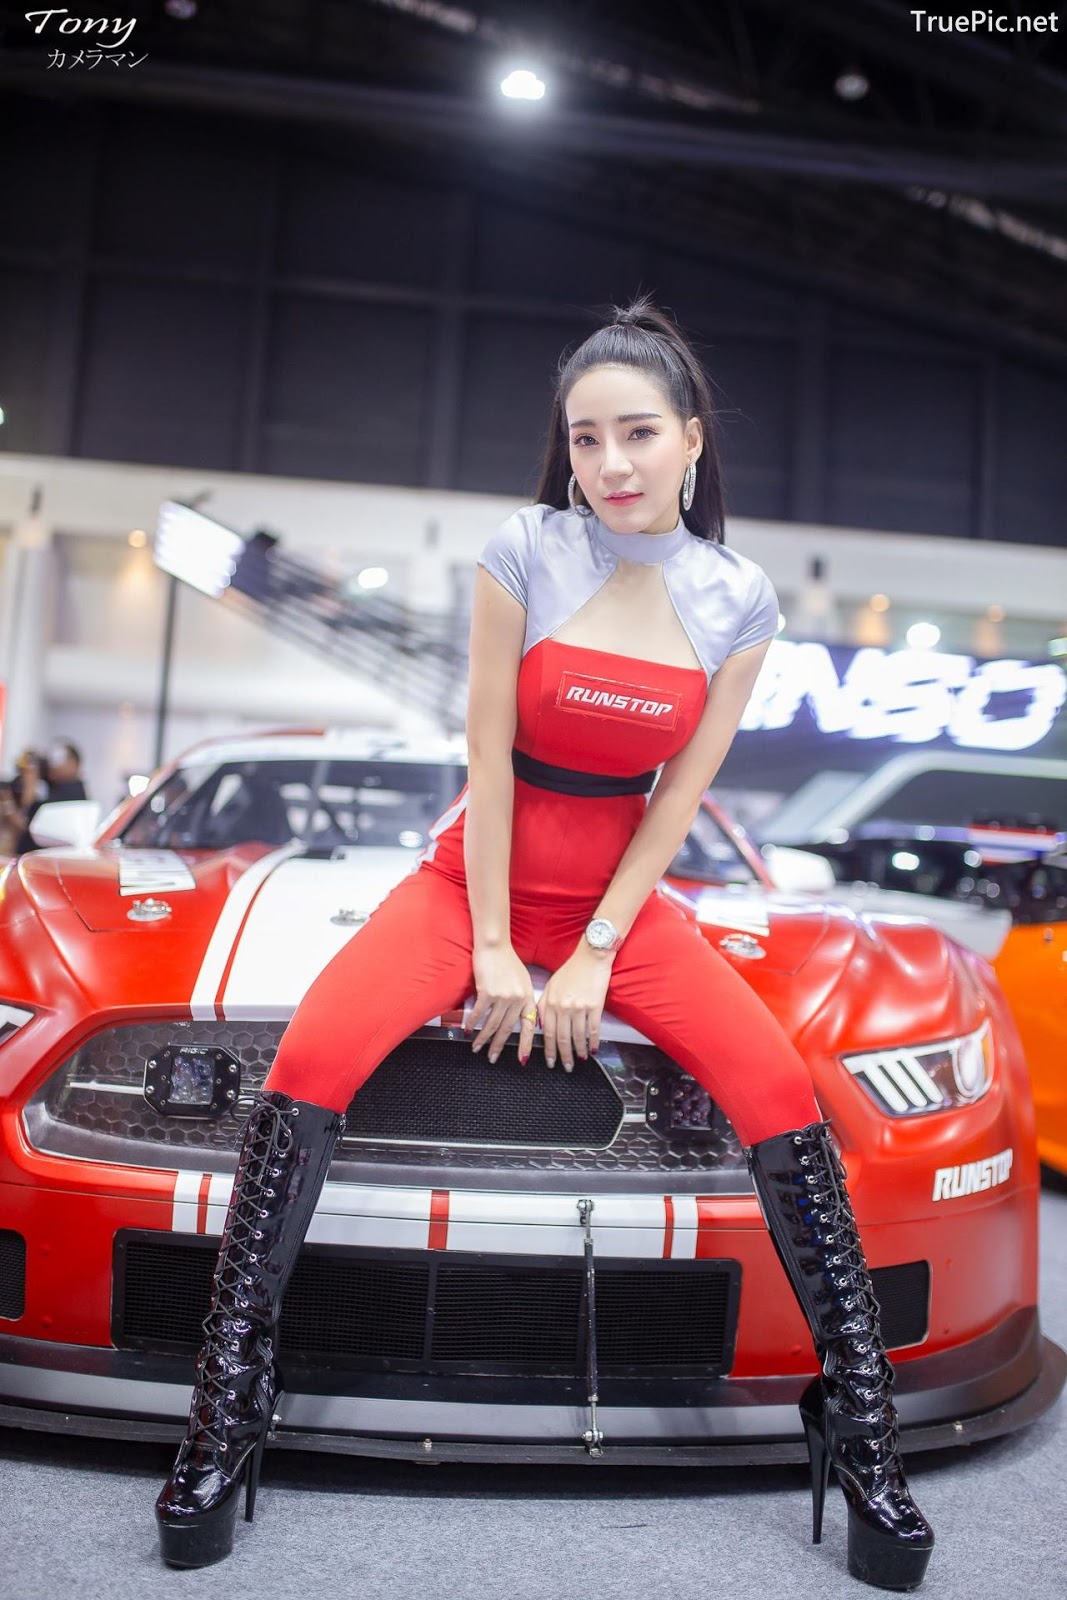 Image-Thailand-Hot-Model-Thai-Racing-Girl-At-Motor-Expo-2018-TruePic.net- Picture-72